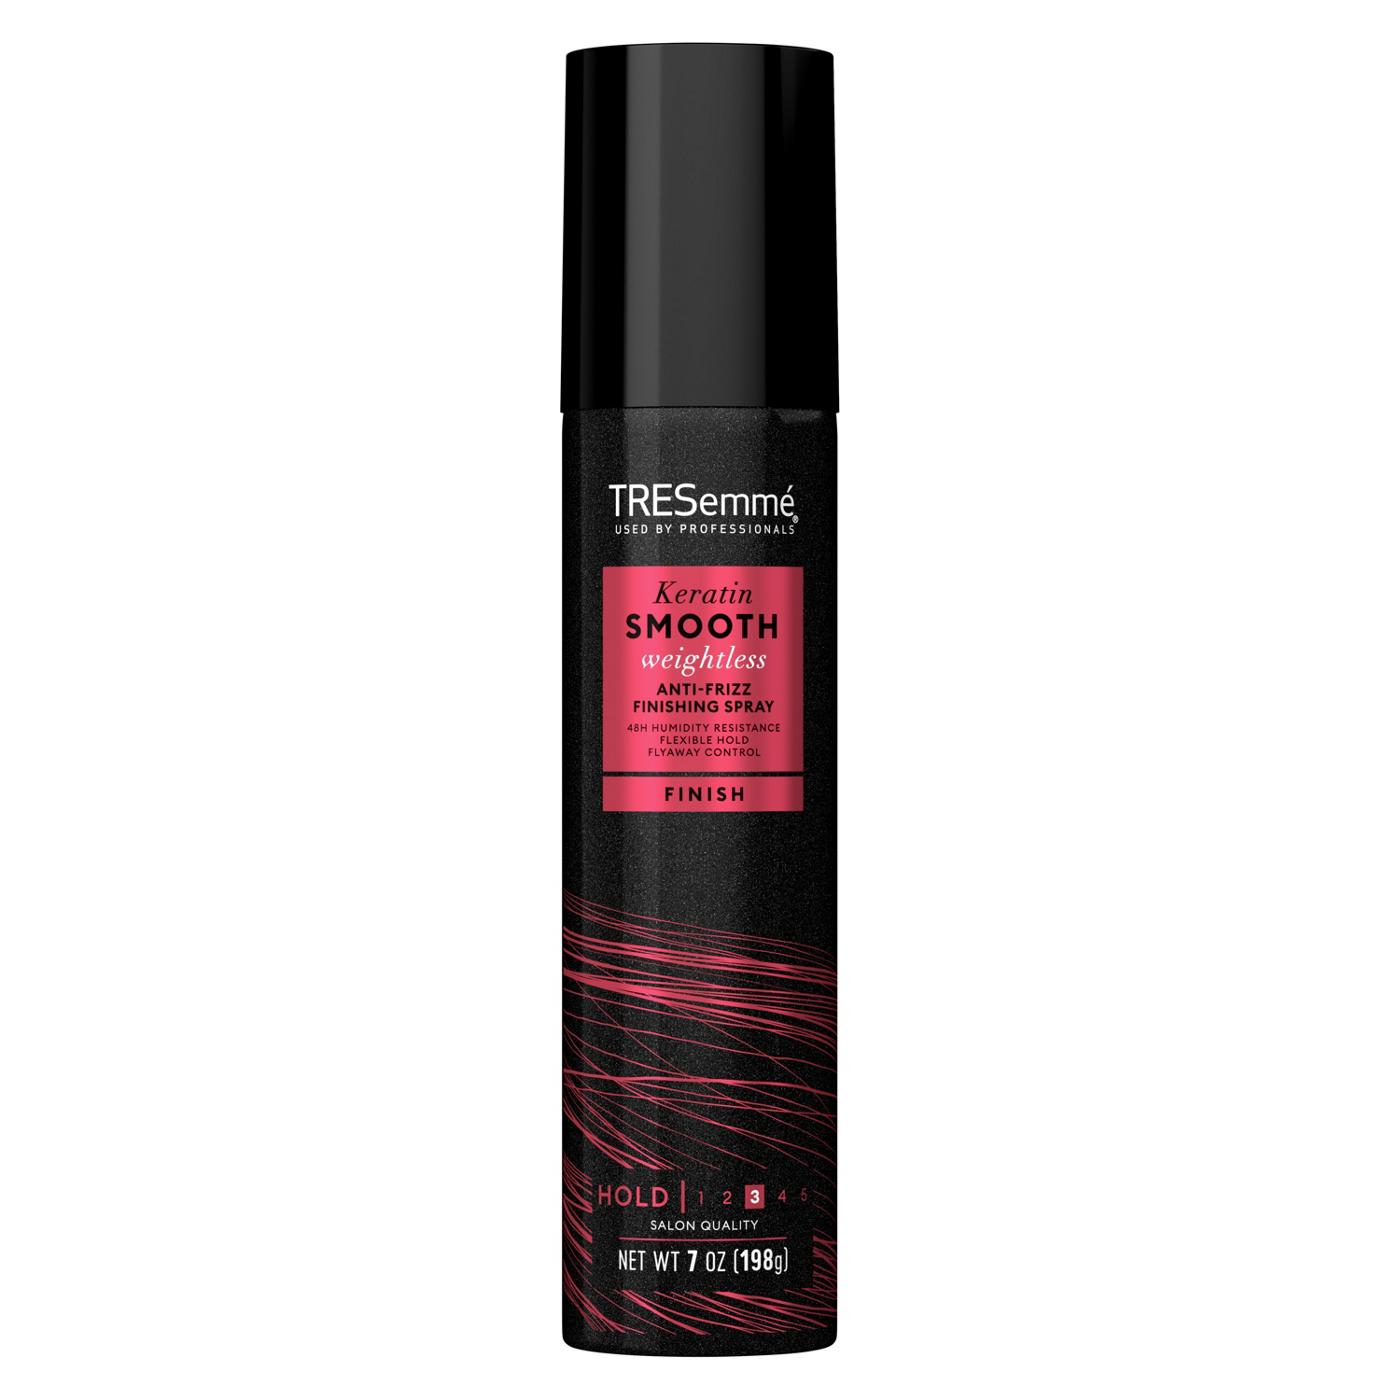 TRESemmé Want smooth, perfectly styled hair, minus the frizz? Lock in your smoothest looks and show humidity who's really in charge with TRESemmé Keratin Smooth Anti-Frizz Hairspray, from our Keratin Smooth Weightless collection. This anti-frizz hairspray gives you 3 days of weightlessly smooth hair, so your style can keep up with you. Our formula gives you the flexible hold that keeps your style in place without the stiffness, stickiness or crunch! It's also lightweight, oil-free, paraben-free, and totally safe for colored hair, so you can use it with complete peace of mind. Perfect your Smooth Blowout in 3 easy steps. Prep strands with Keratin Smooth Shampoo and Conditioner, style with Keratin Smooth Mousse, and finish your look with our Keratin Smooth Anti-Frizz Finishing Spray. Fight frizz and control flyaways by holding the can 10-to-12 inches from your hair and spraying away. Start your day with confidence, knowing that your hair will look gorgeous all day long! Since 1948, TRESemmé has been dedicated to providing professional-quality results to empower YOU to express your style. Our unique formulas are PETA-approved and made with carefully selected ingredients, and TRESemmé never tests on animals. We're always made with intention and inspired by the latest trends and style.; image 1 of 4